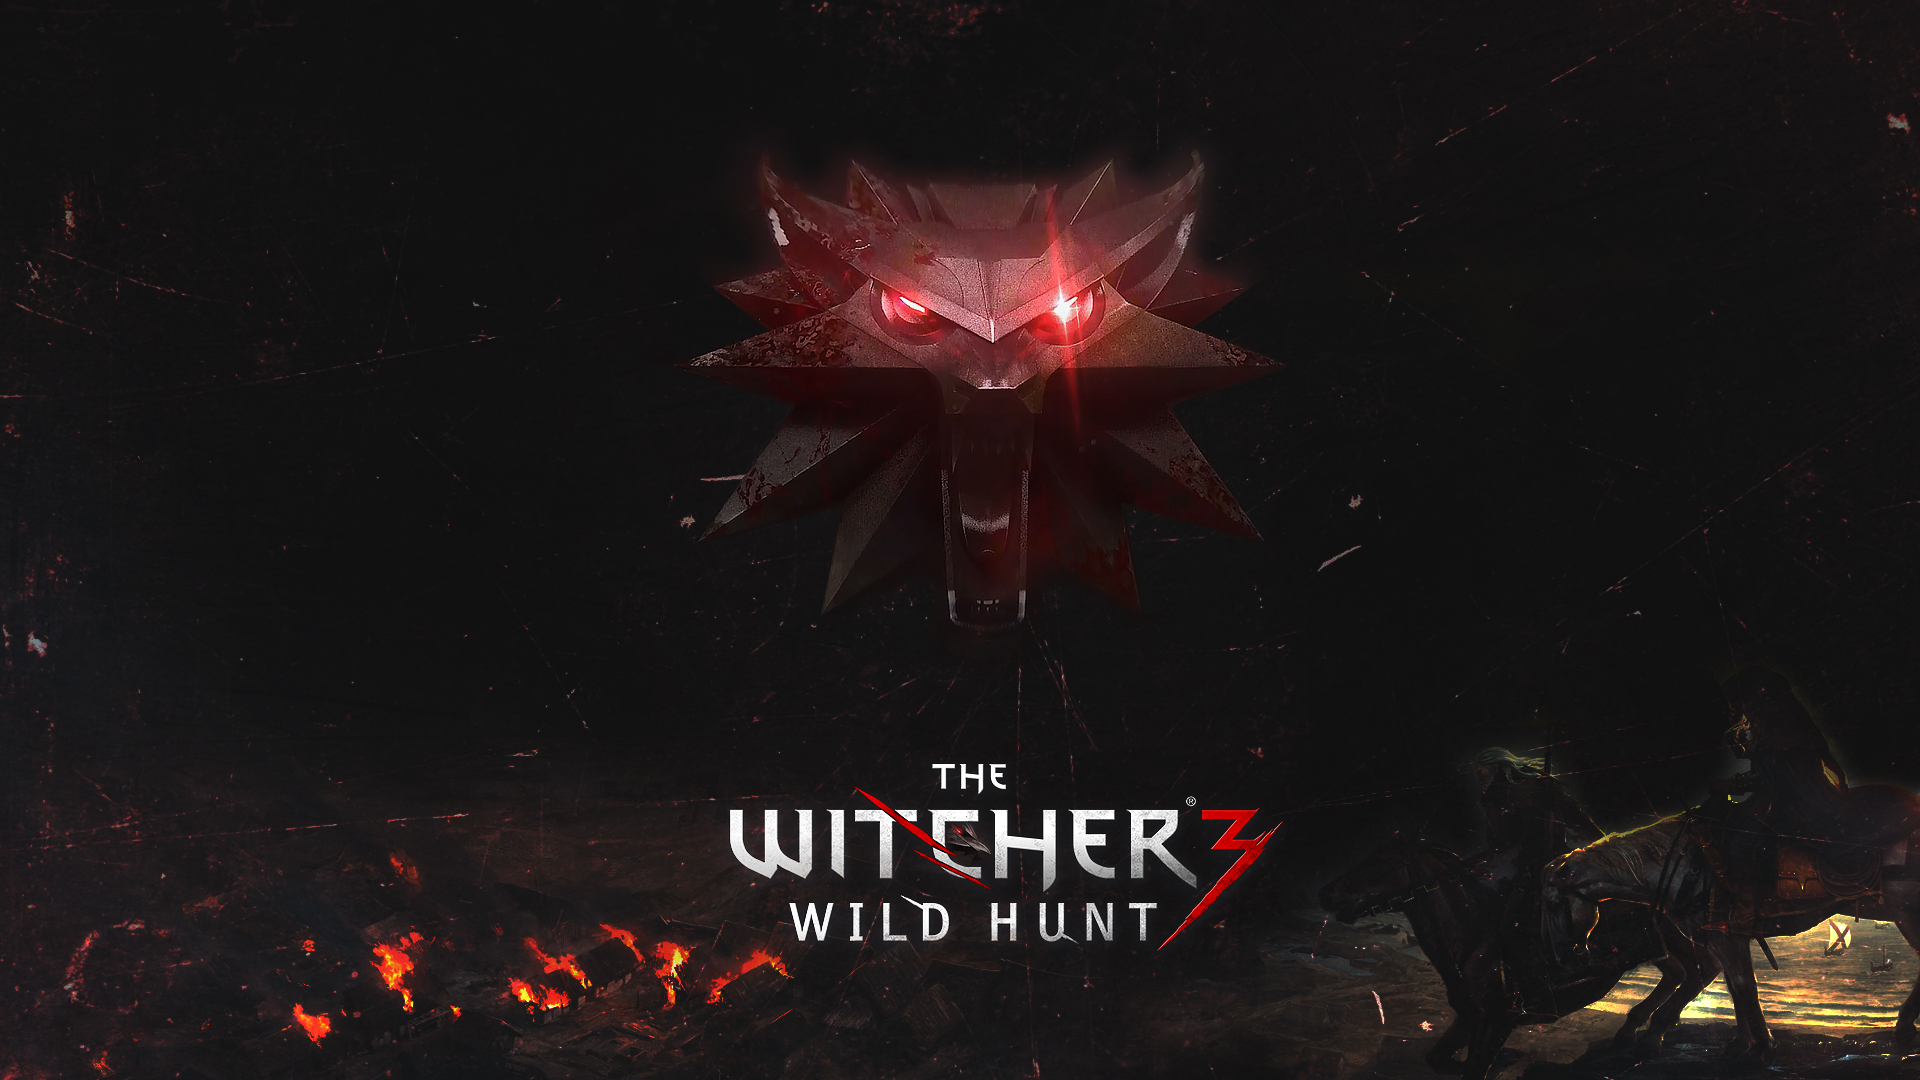 The Witcher 3: Wild Hunt collector's edition is hot